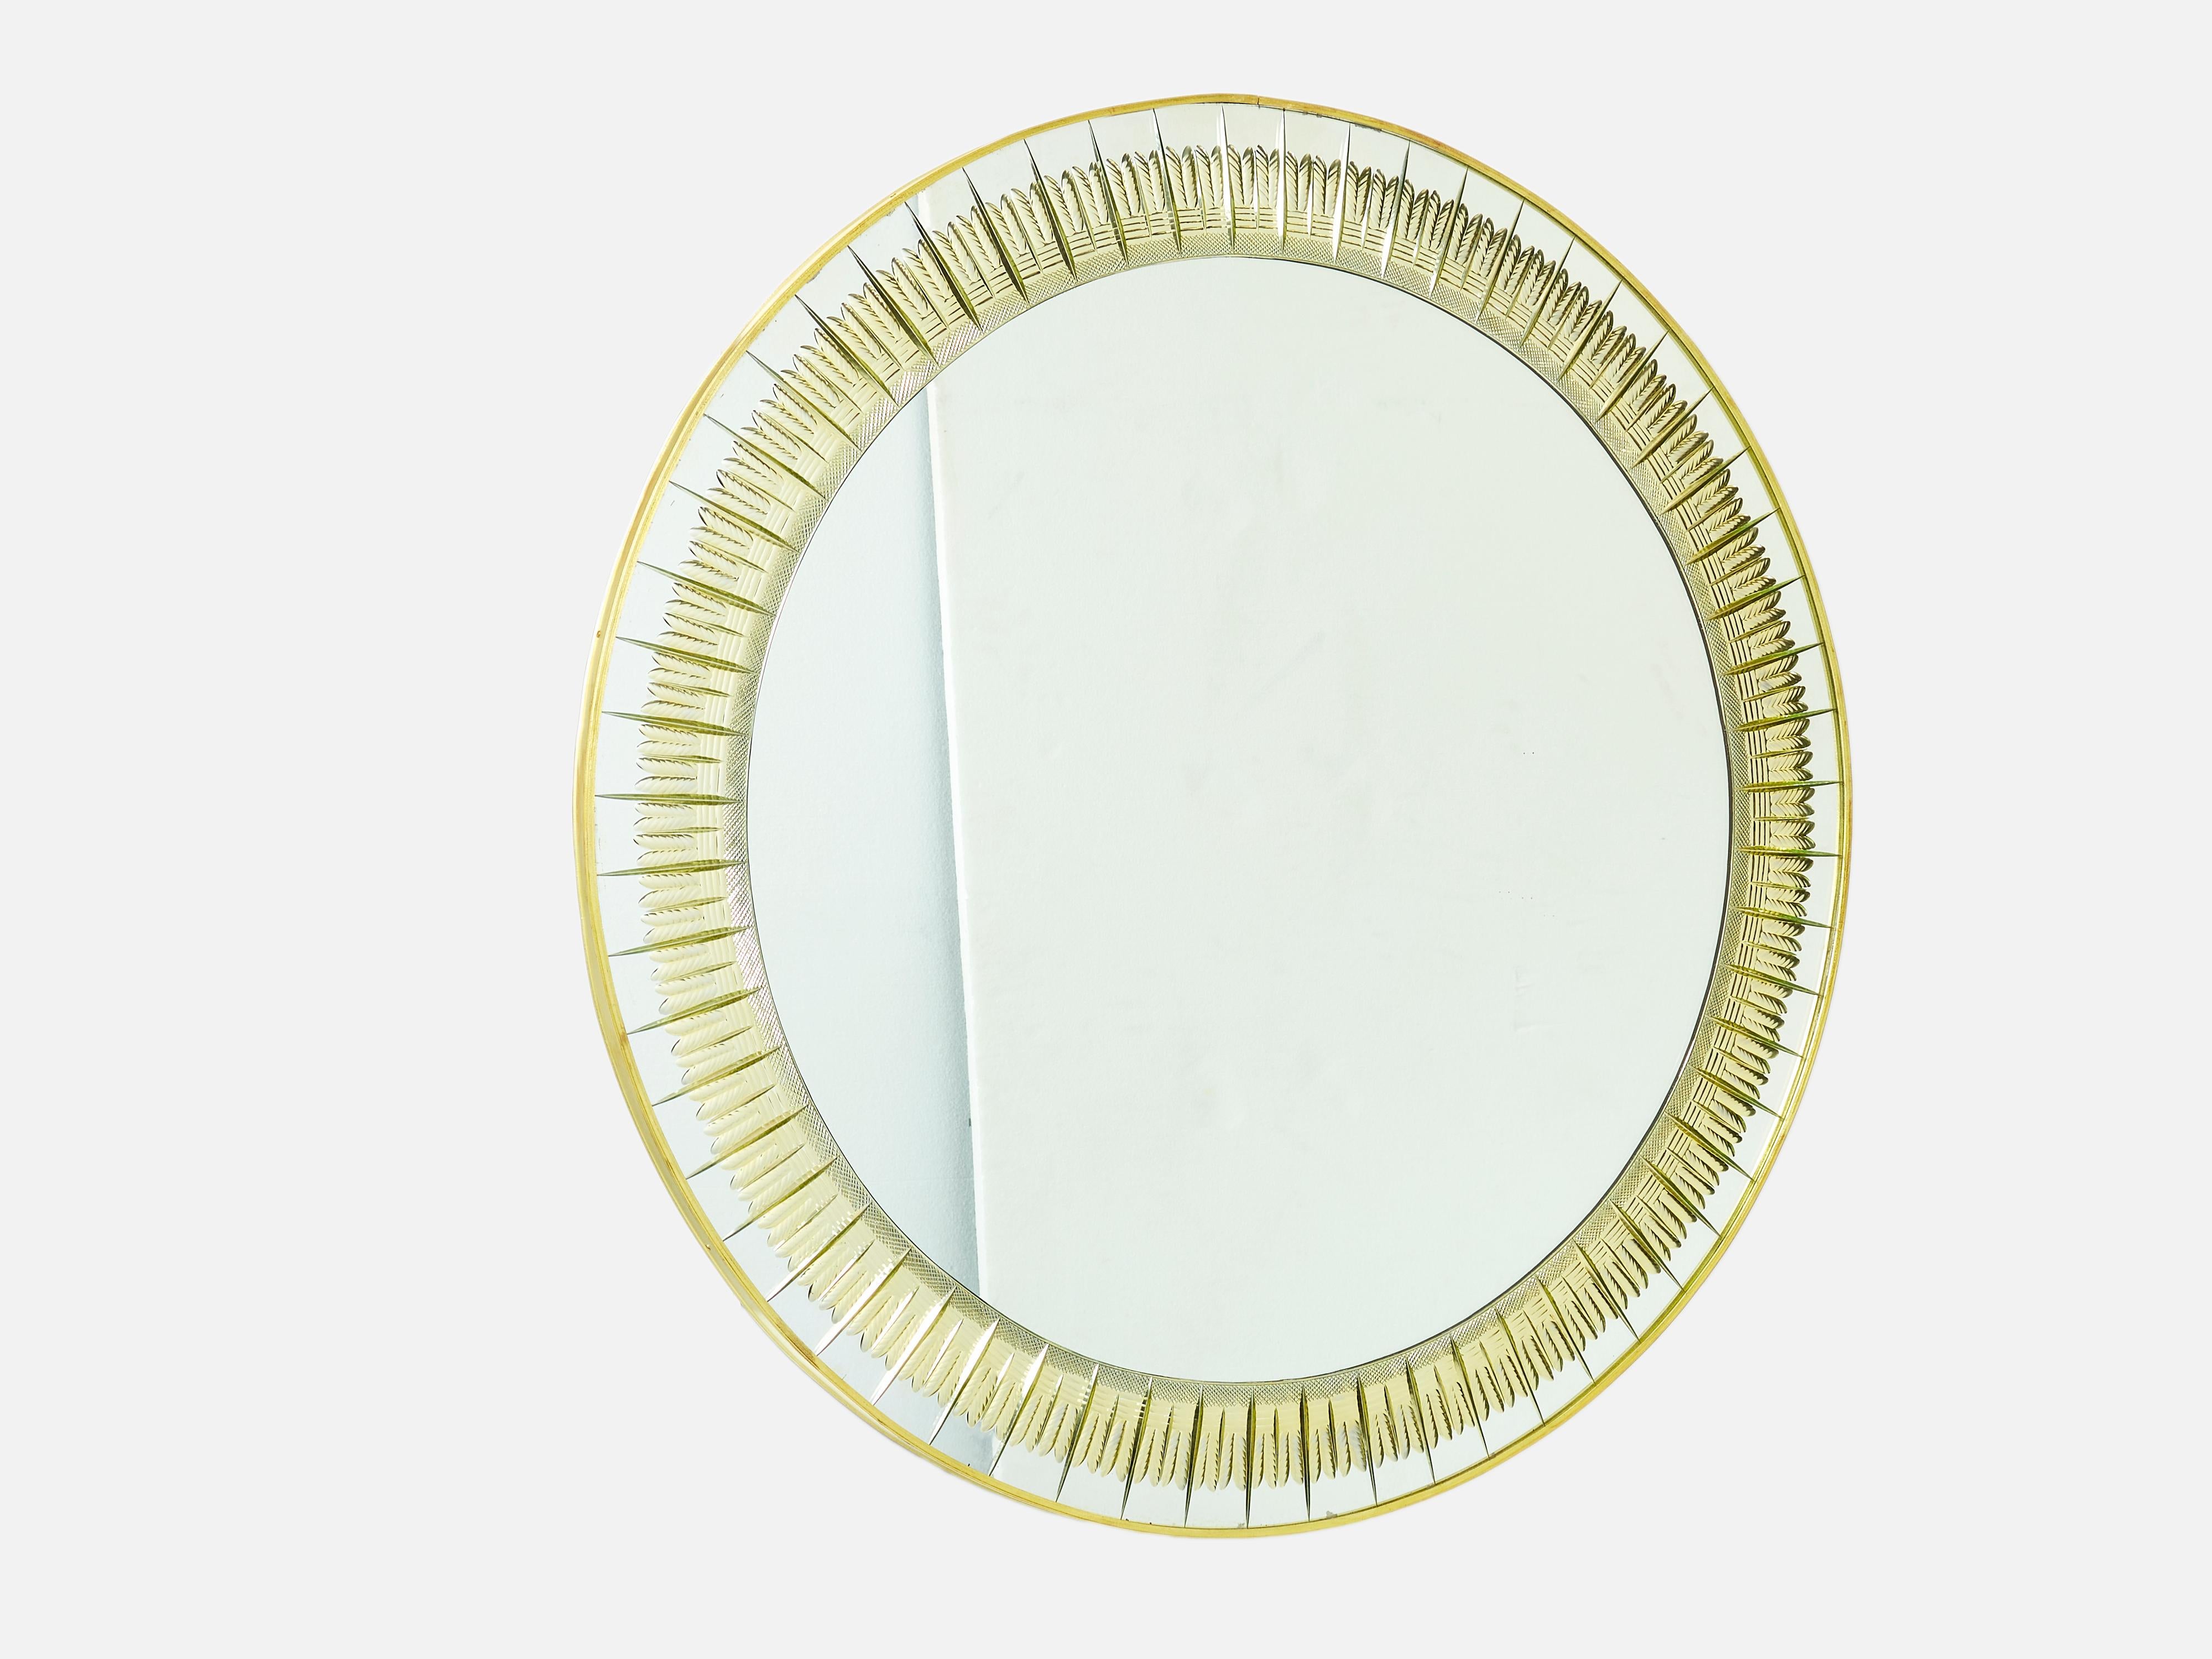 With its strong design, this round brass mirror was made by Cristal Arte in the early 1960s. This wall mirror features a golden colored engraved crystal edging with brass frame border and trim. A perfect mirror for an entrance, a living room or